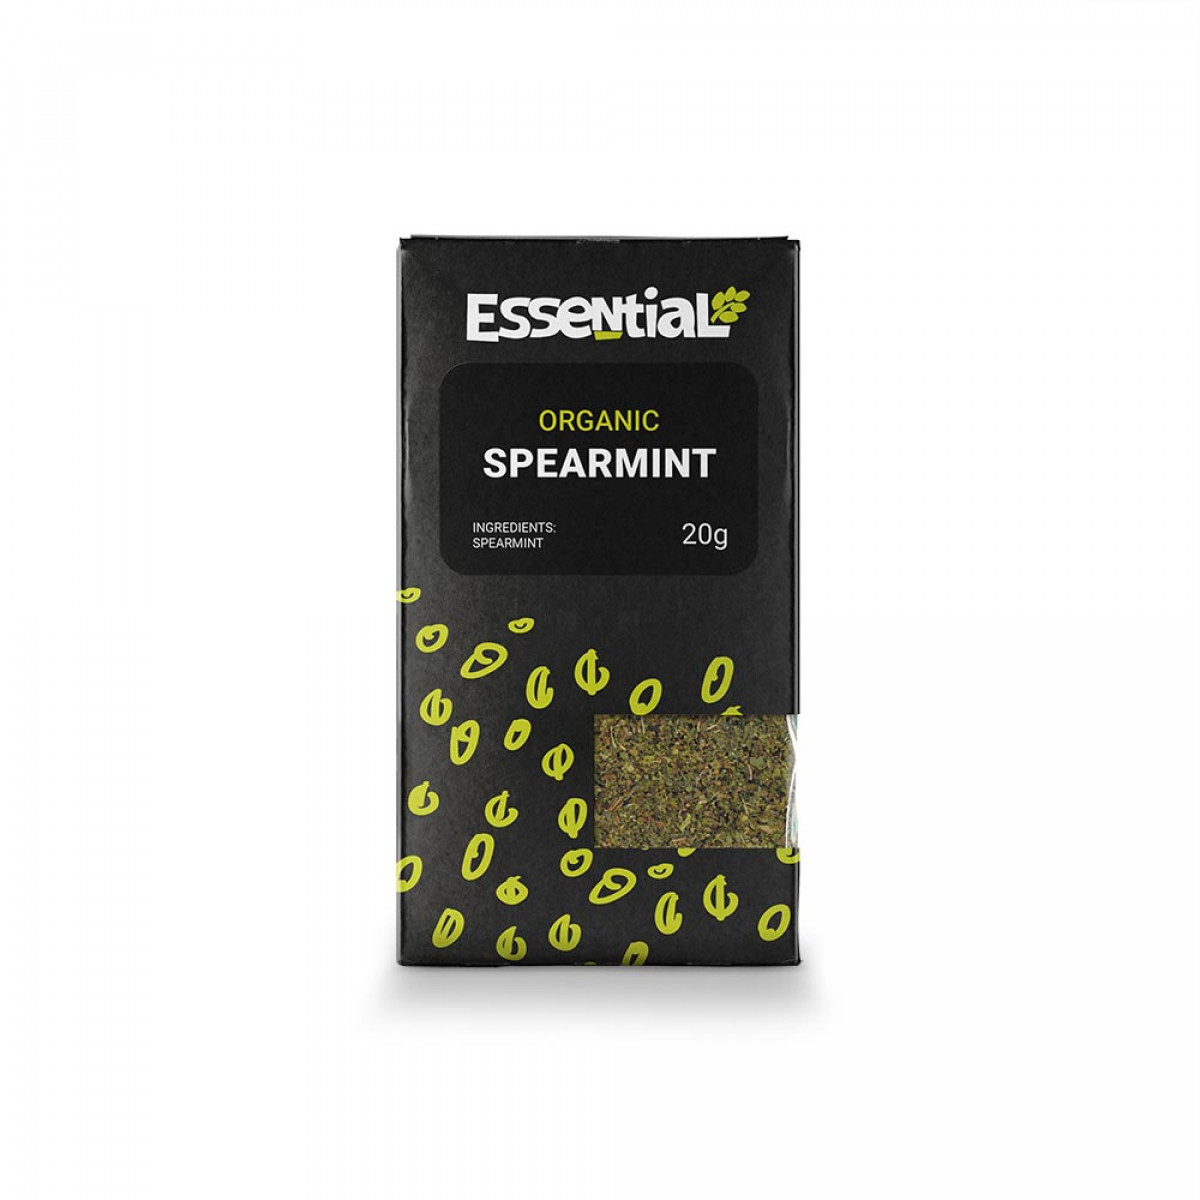 Product picture for Spearmint